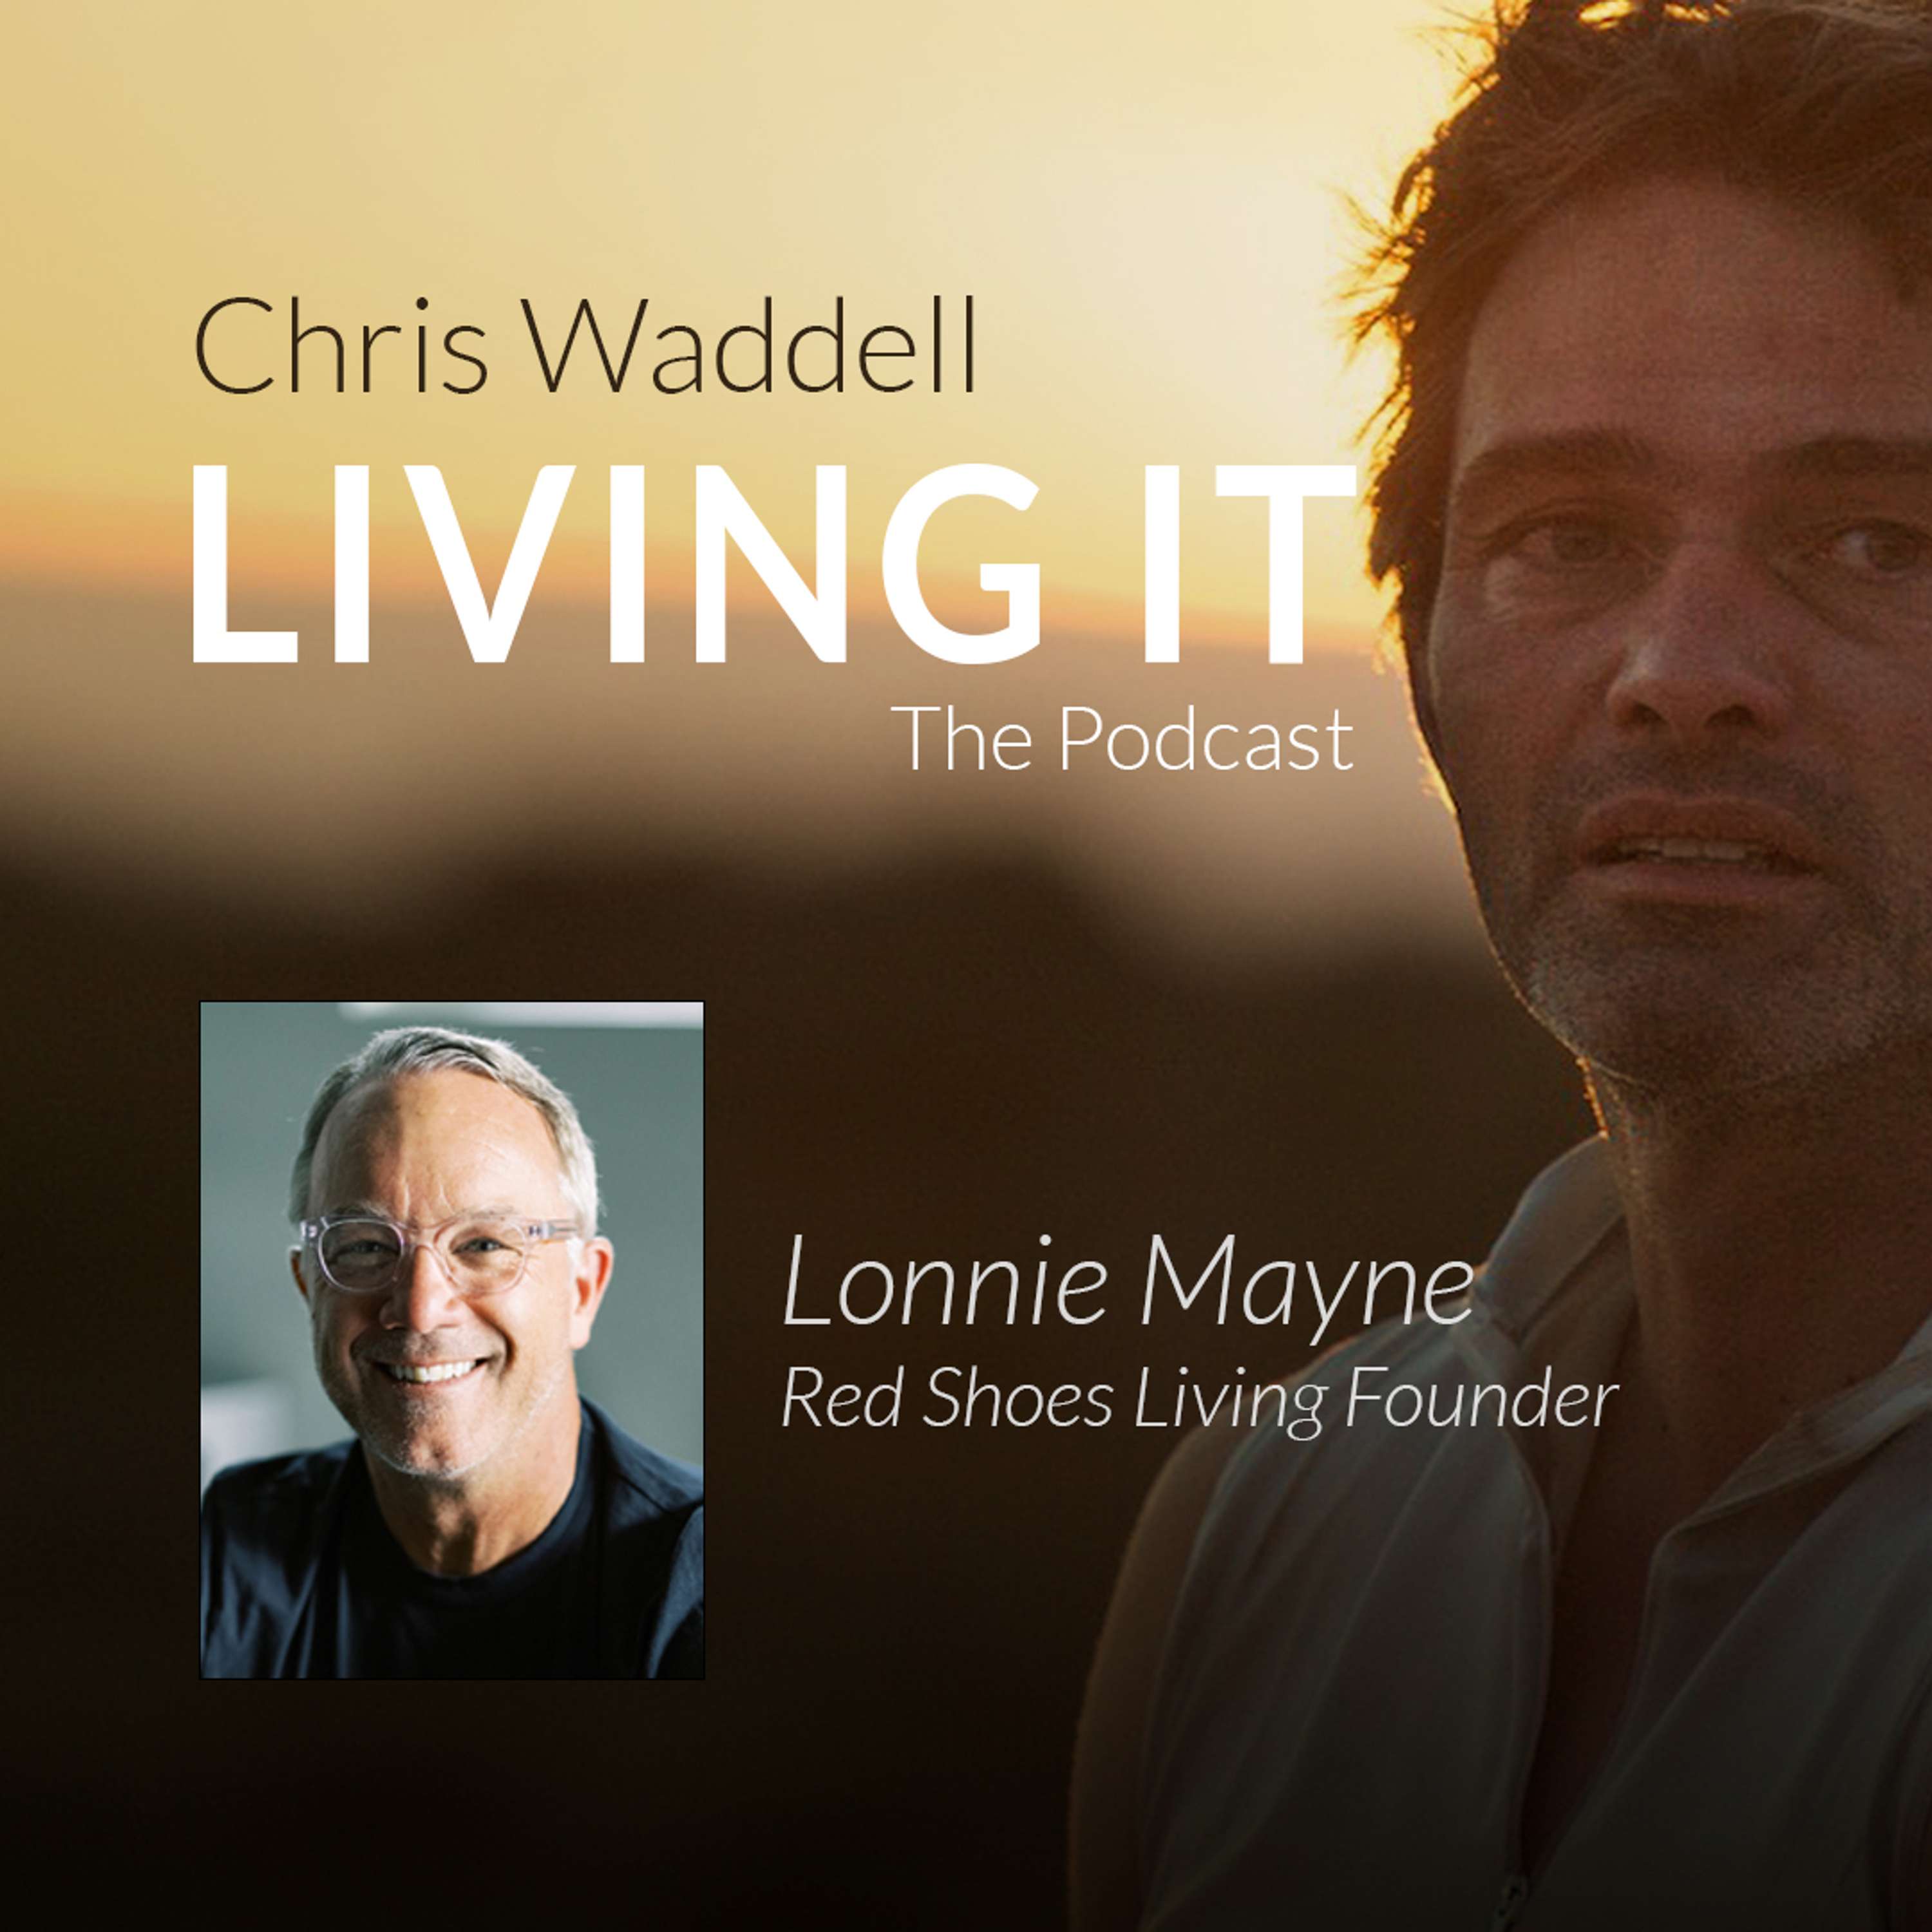 Lonnie Mayne - Red Shoes Living Founder